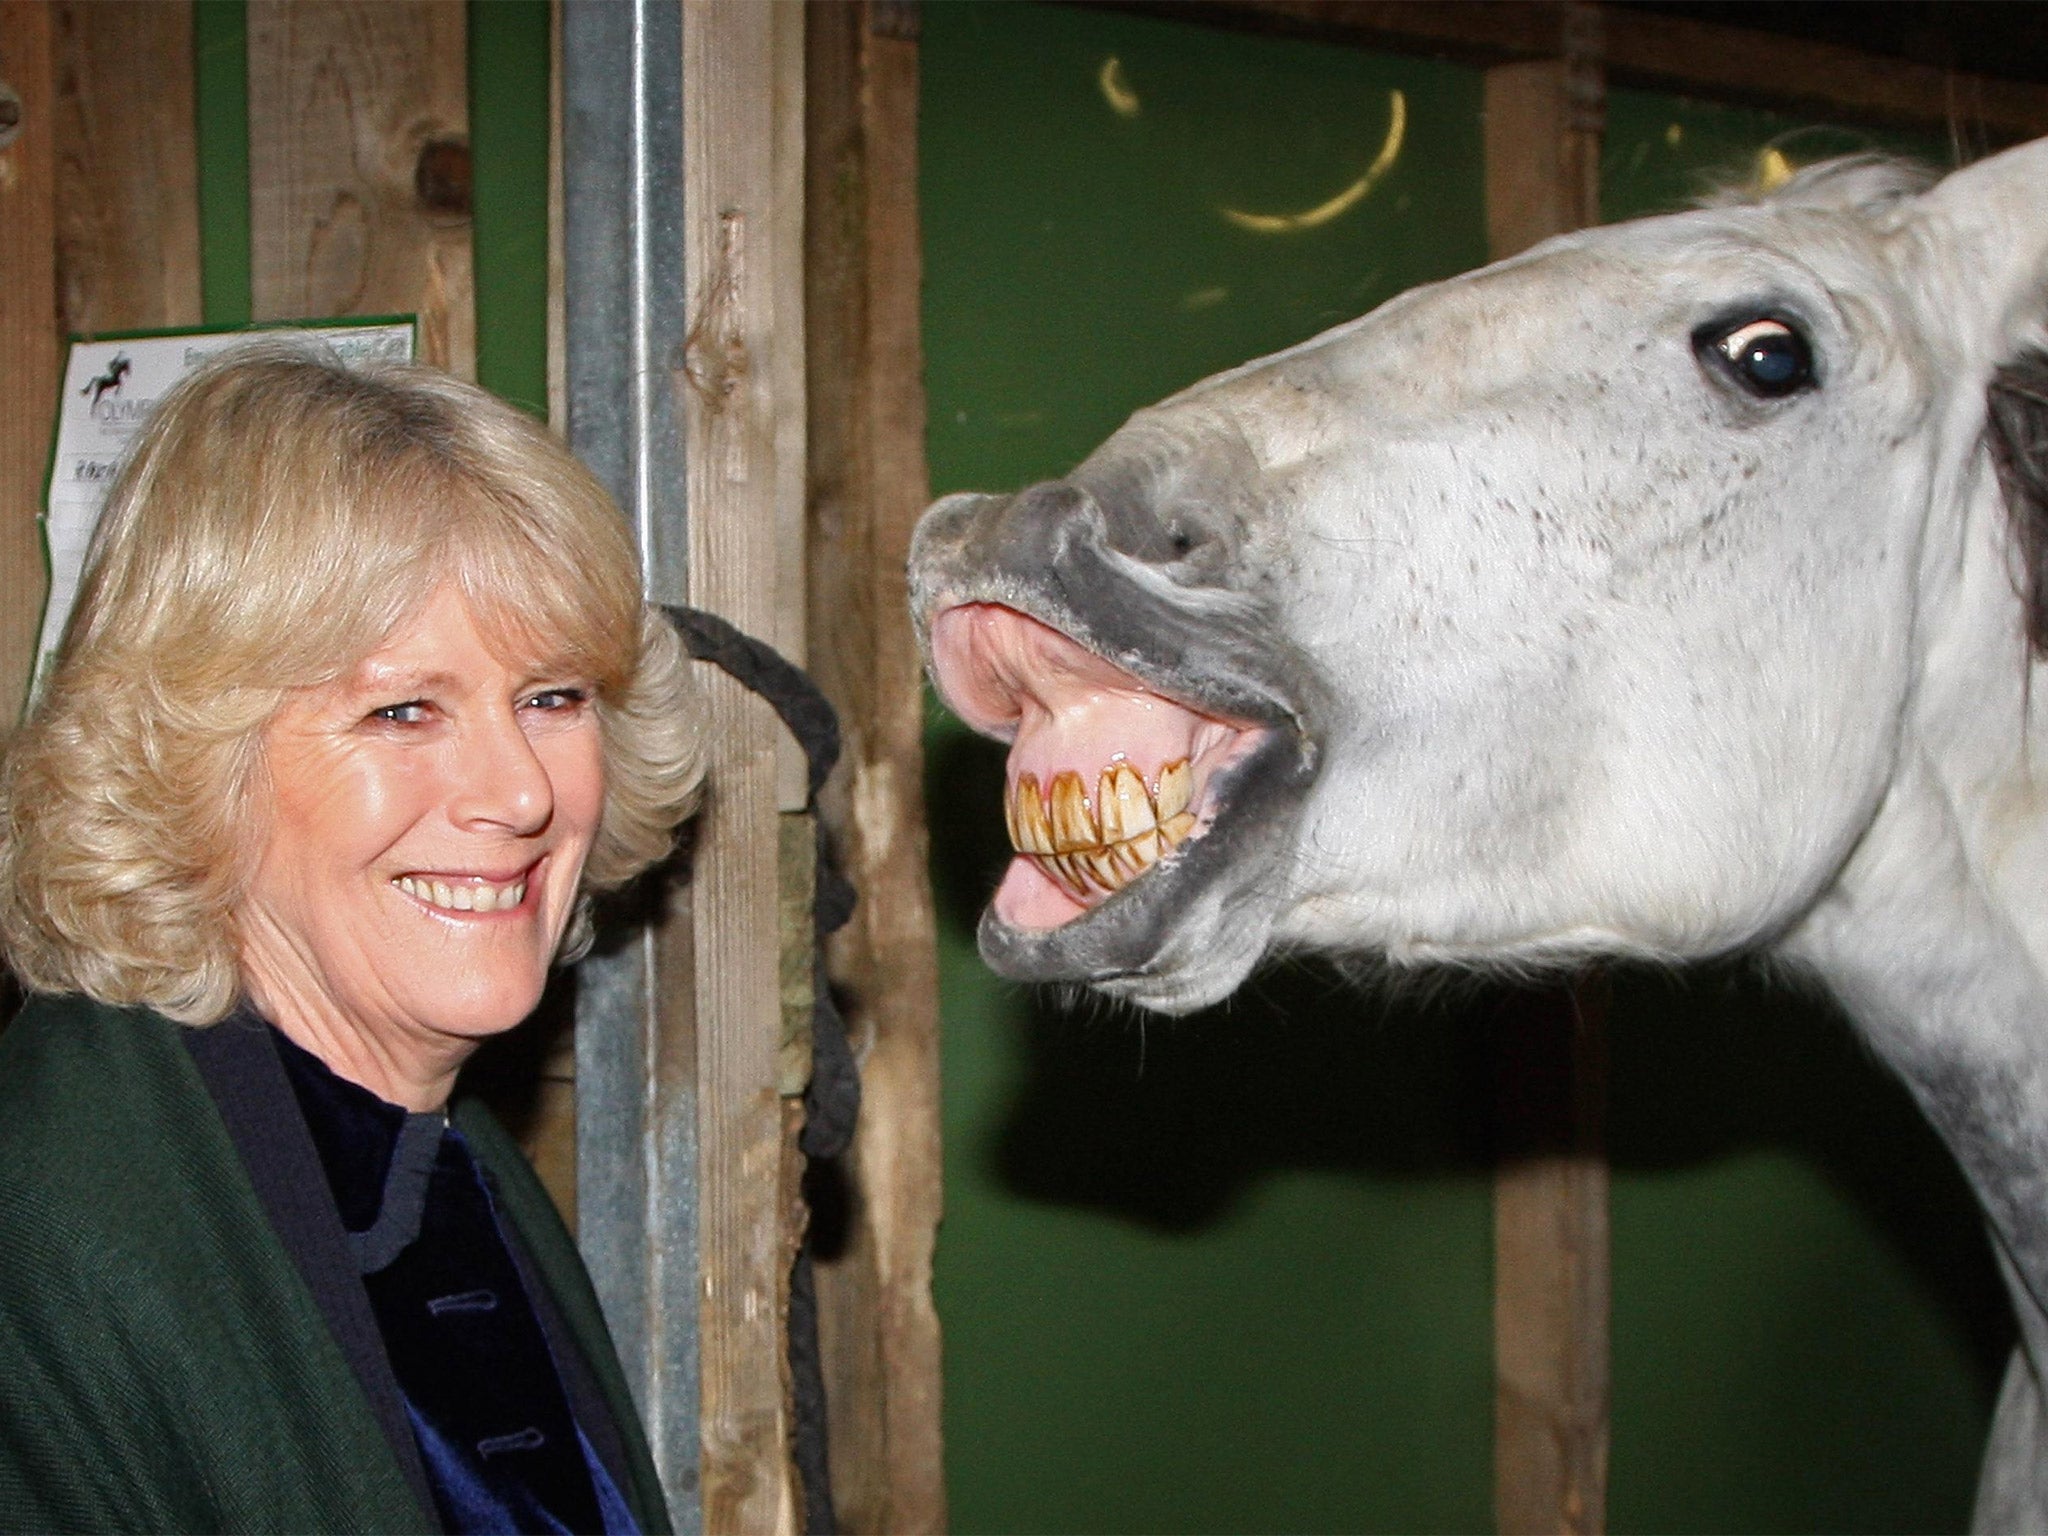 The Duchess of Cornwall touring the stables backstage at Olympia, The London International Horse Show